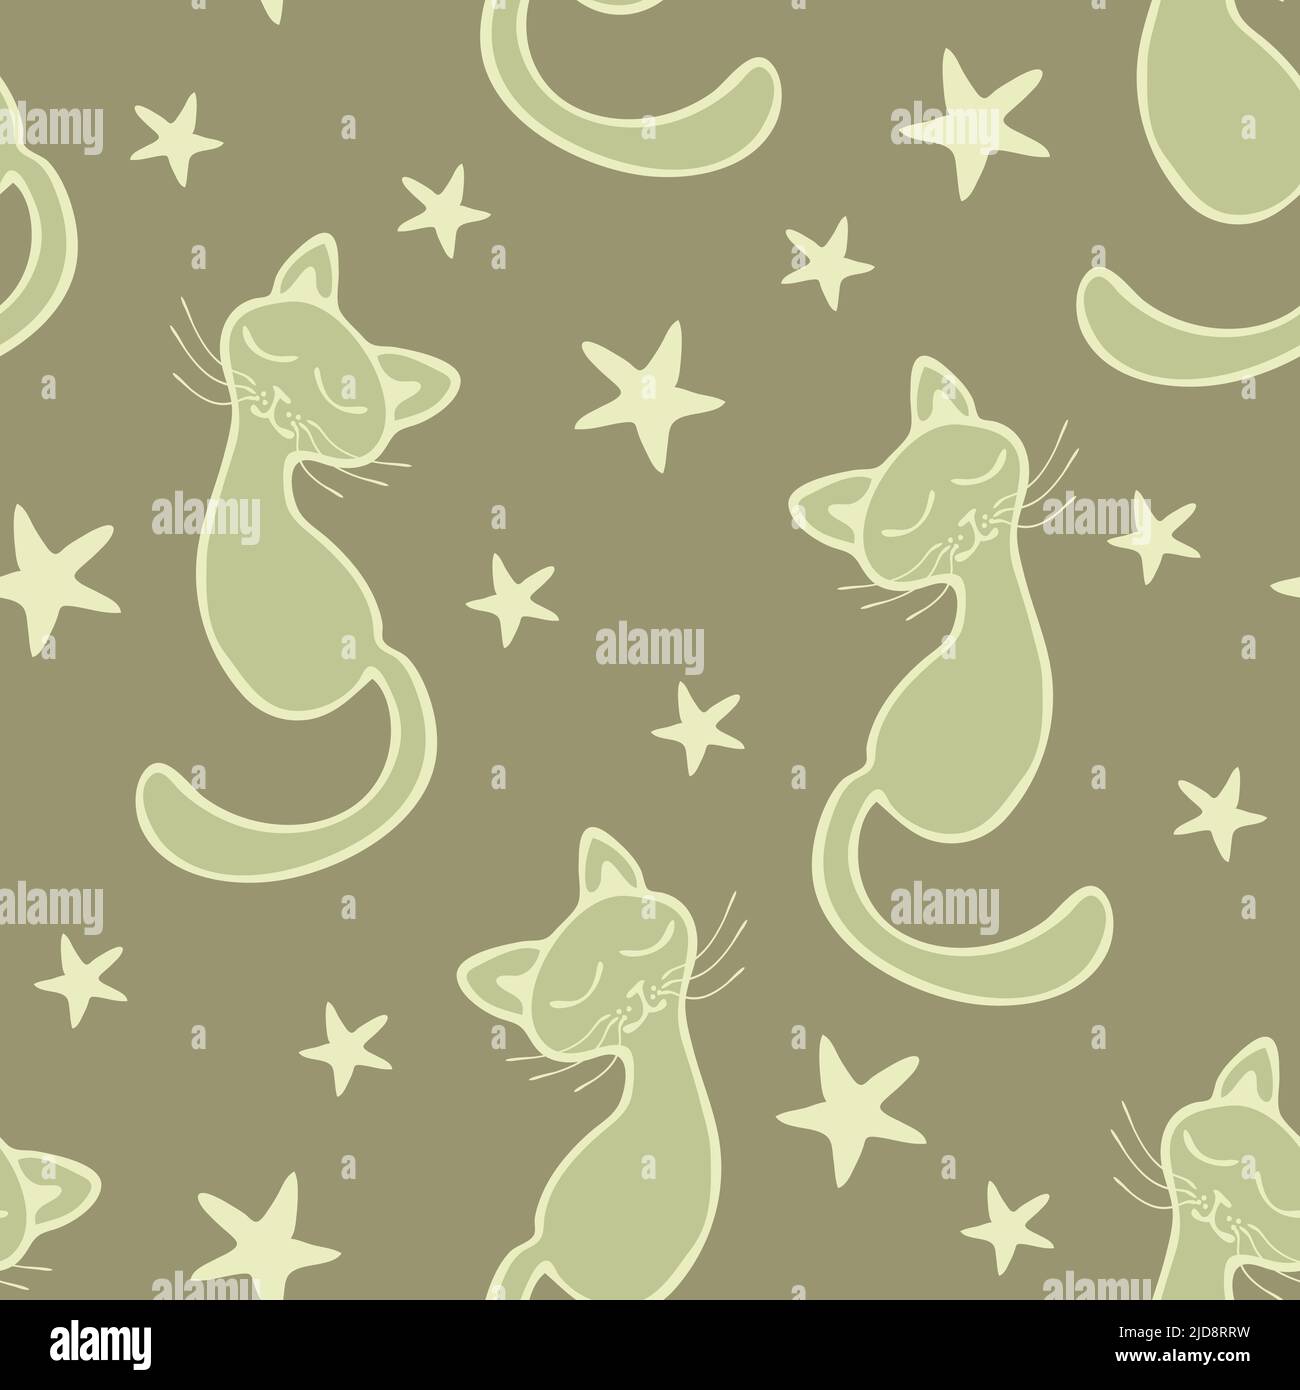 Seamless vector pattern with dreaming cats and stars on grey background. Cute simple animal wallpaper design with kittens. Stock Vector